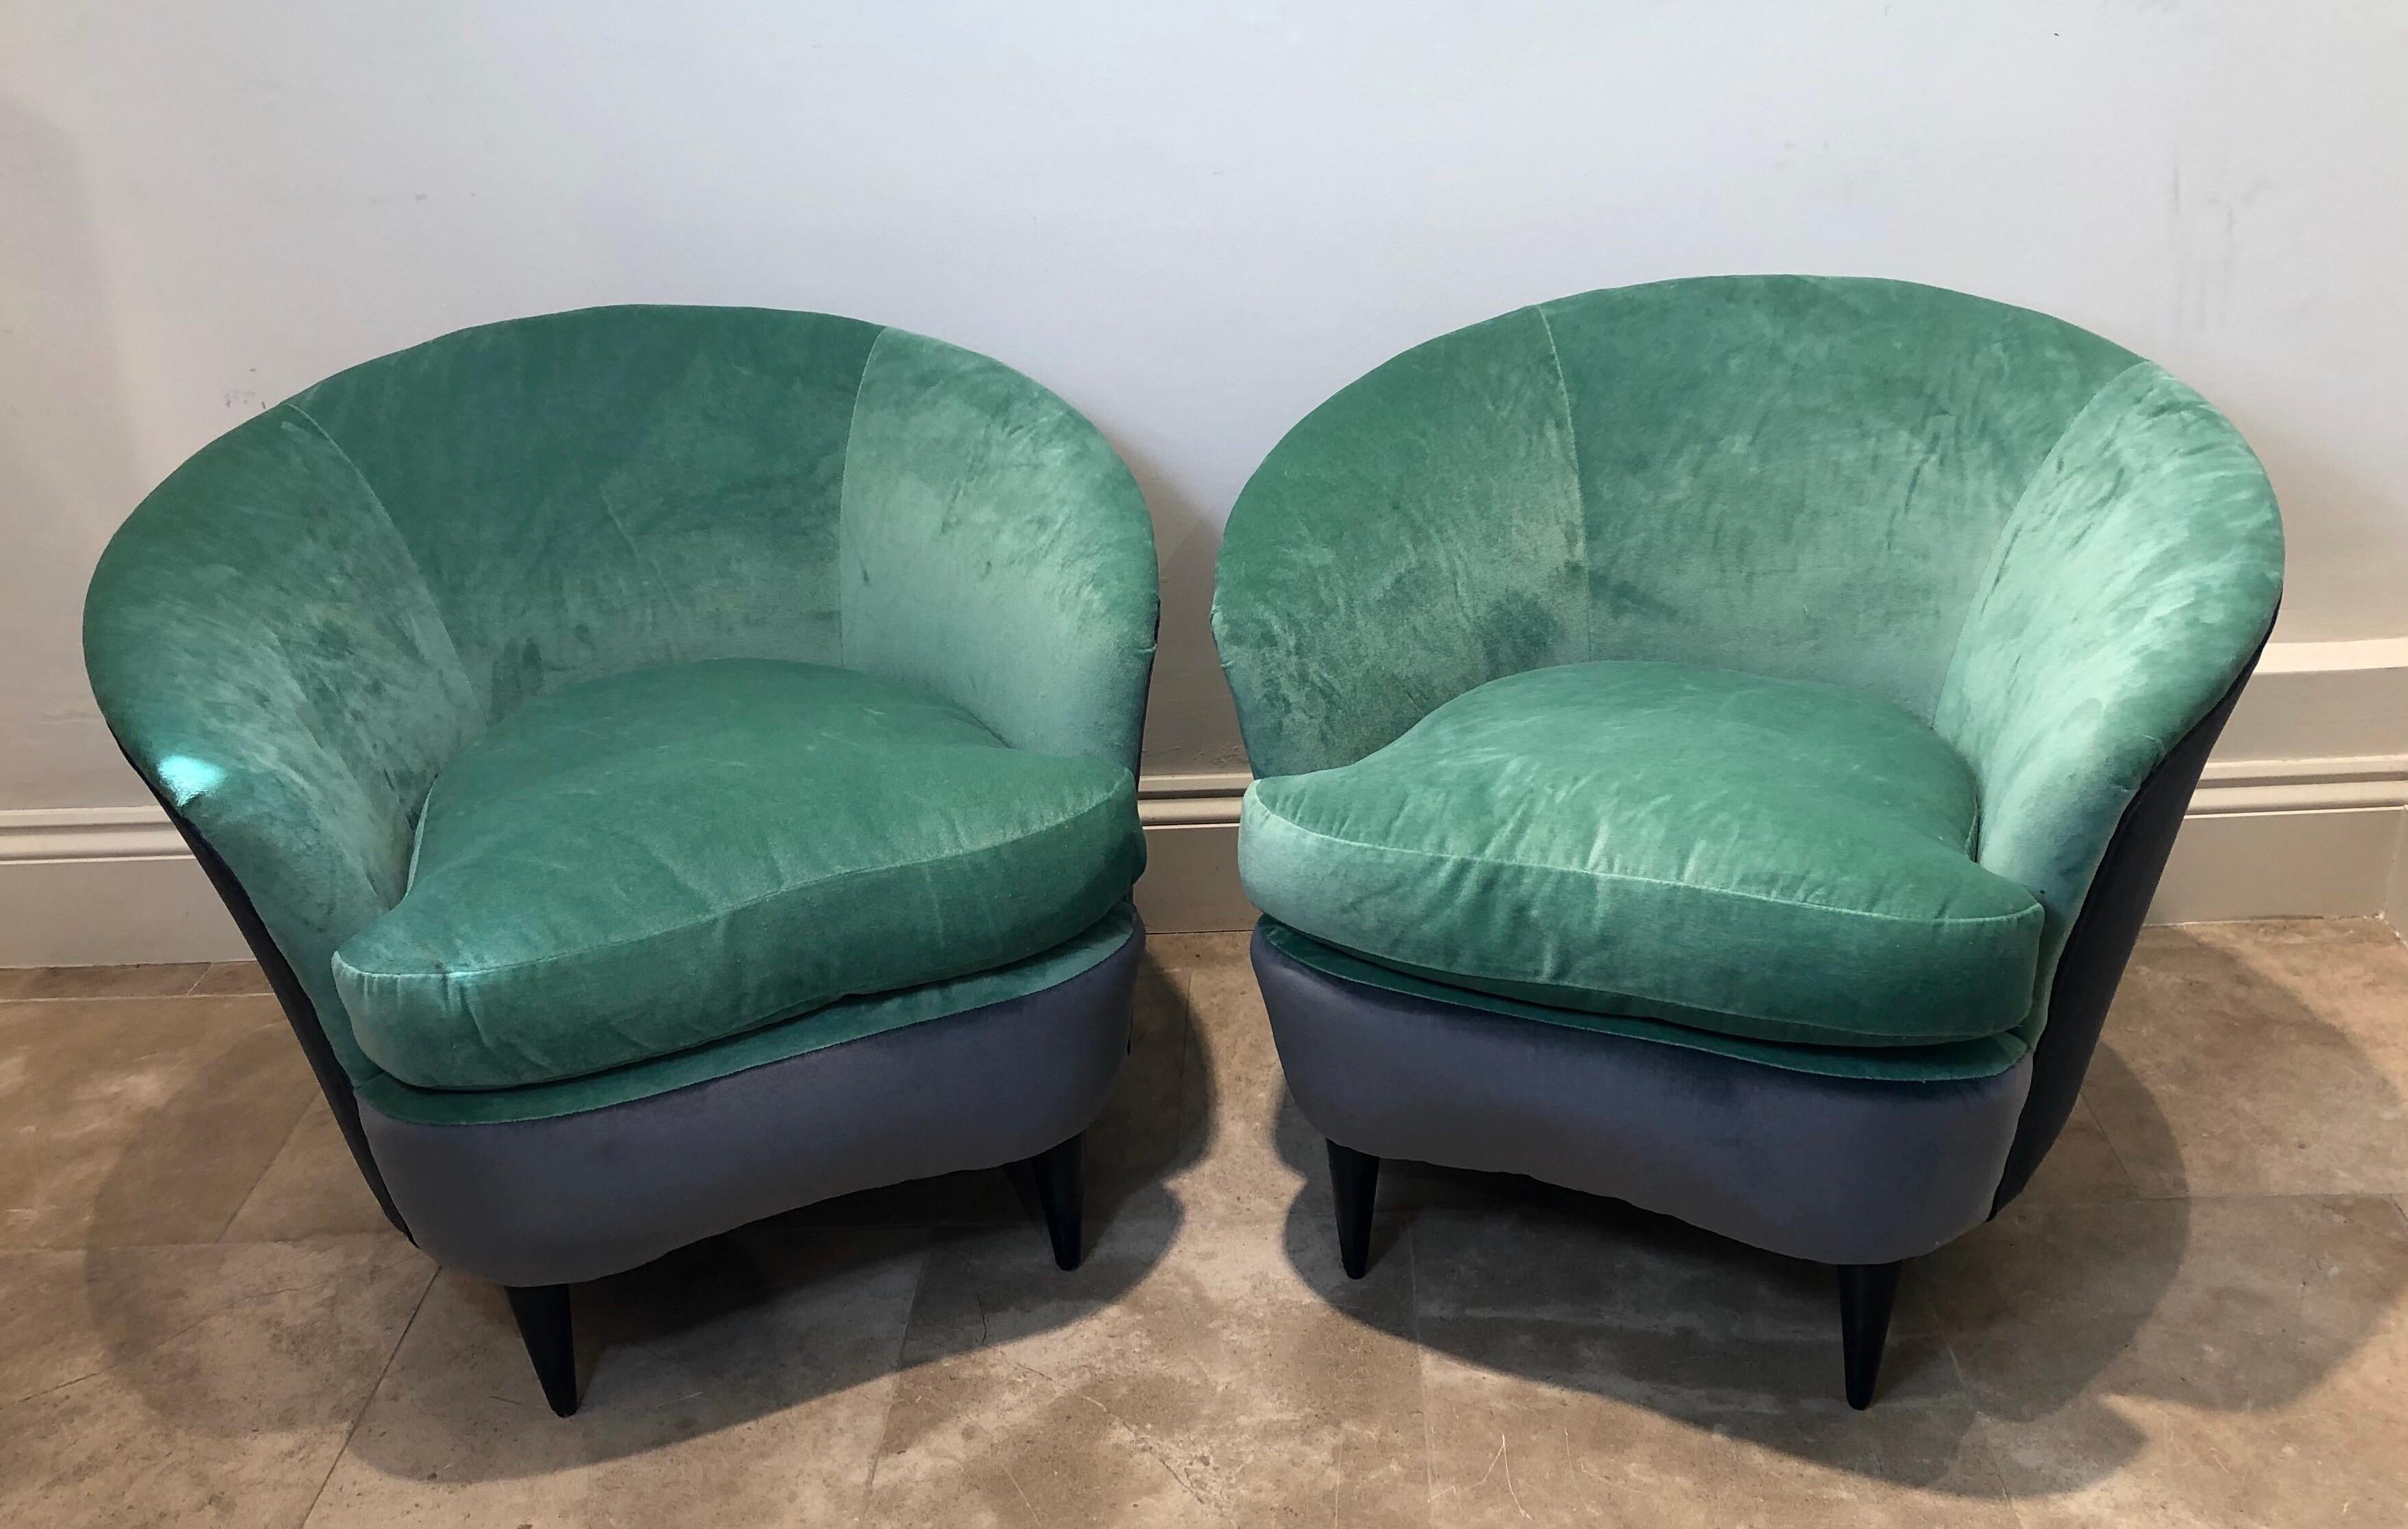 Pair of Italian Curved Chairs and Stools with Mint Green and Grey Upholstery For Sale 3